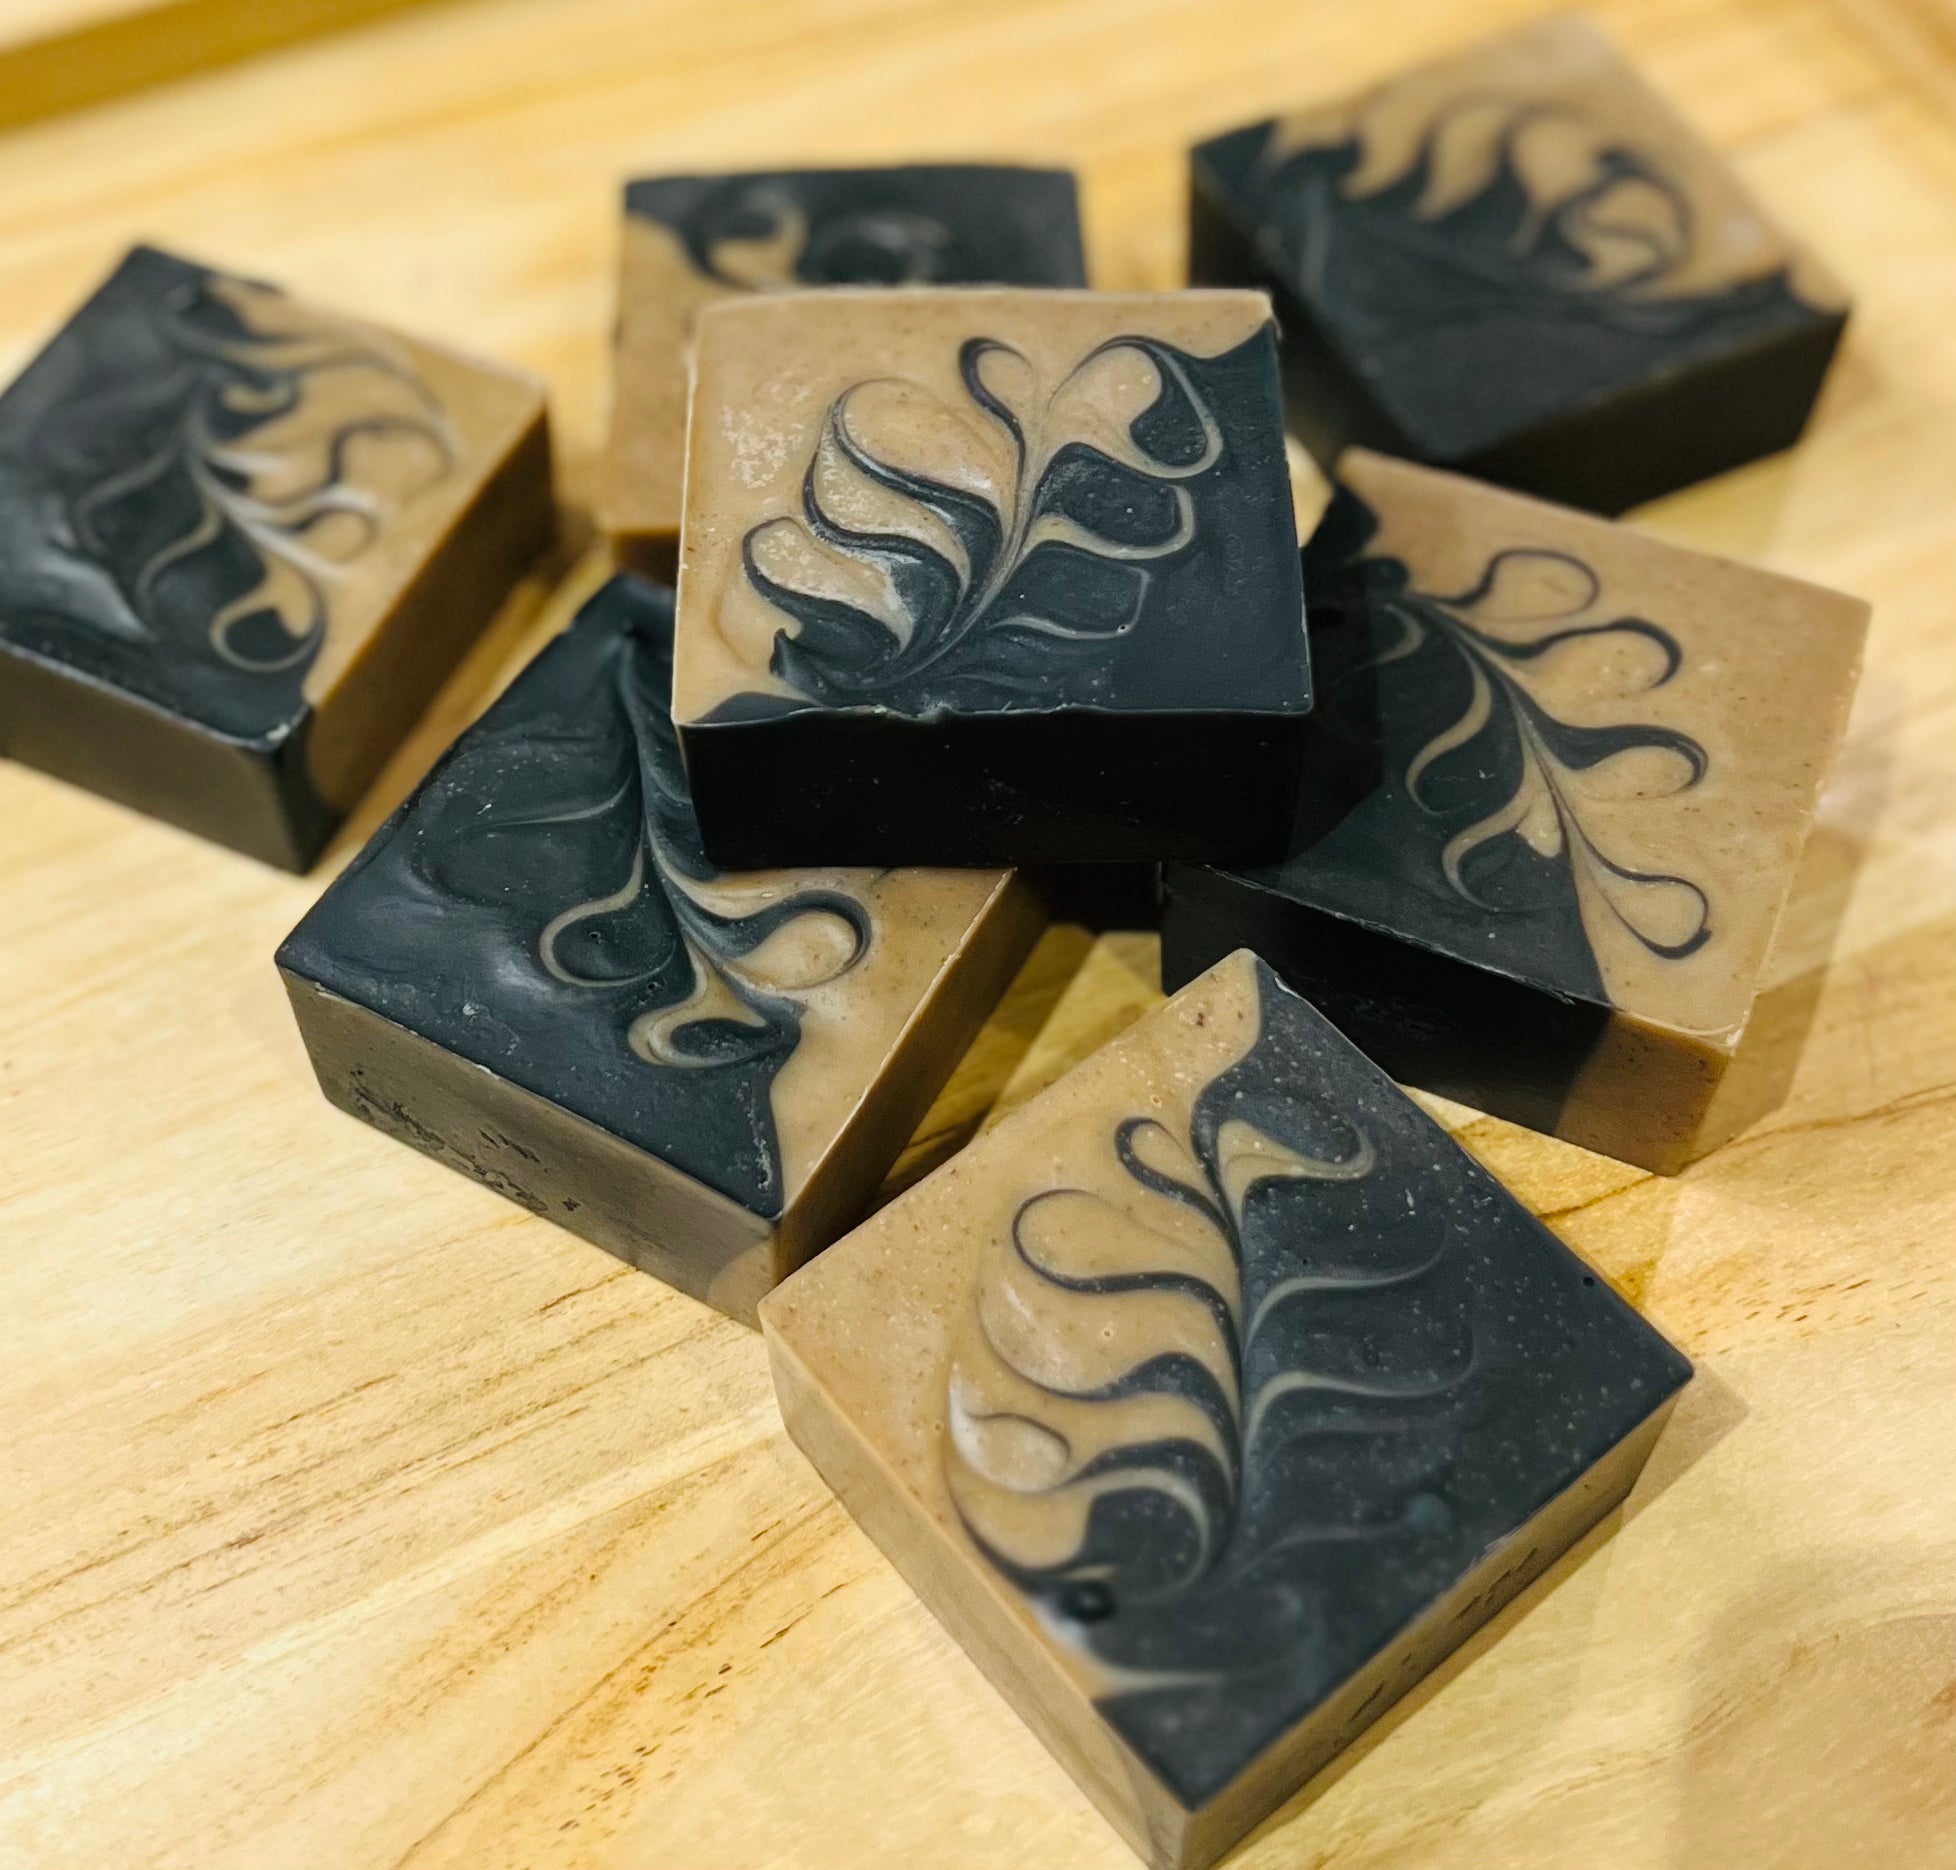 Smoked Tonka & Oud (Goat milk | Activated charcoal soap)